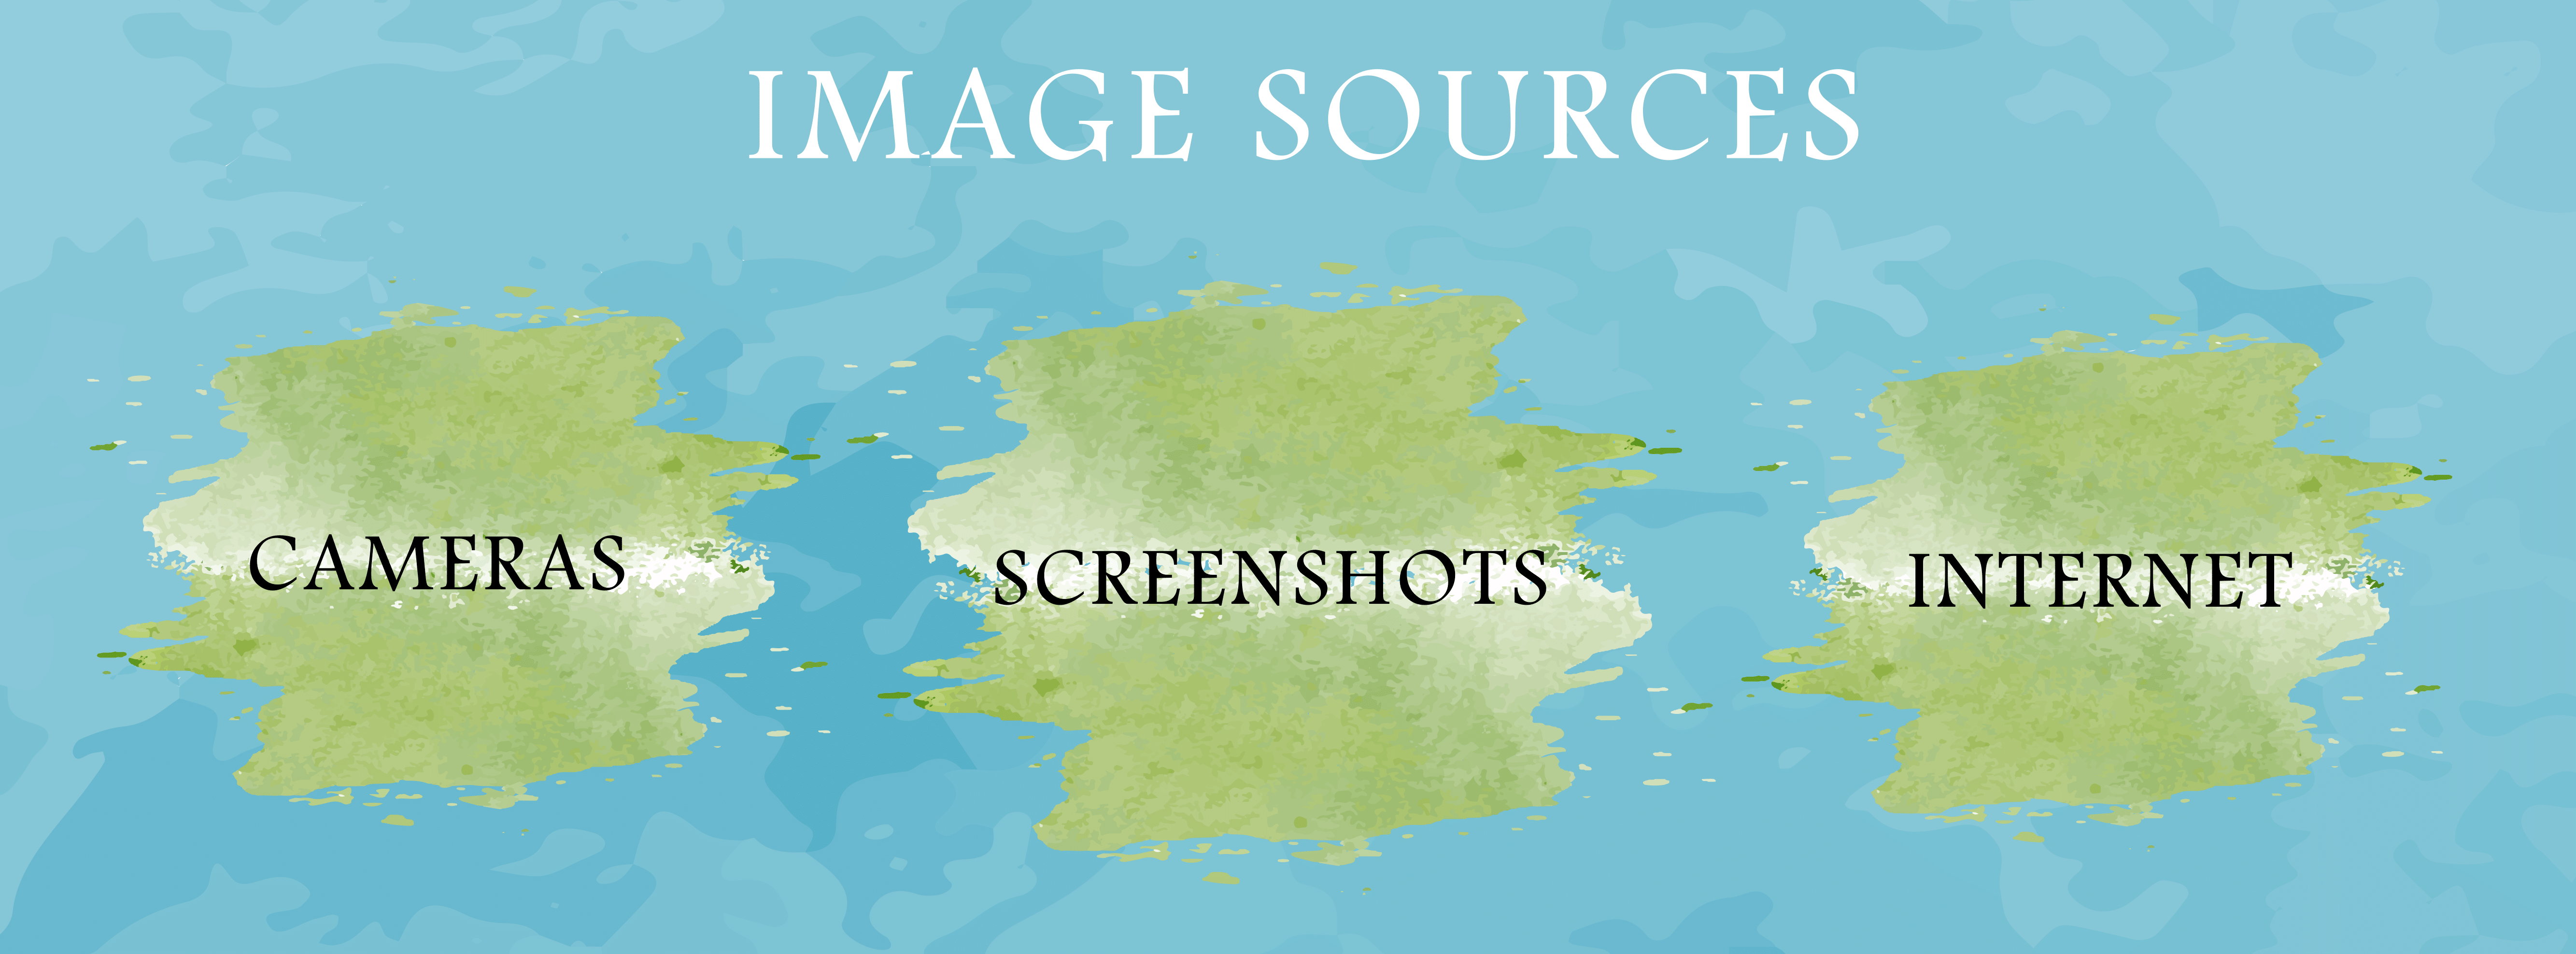 Graphic showing different image sources including cameras, screenshots and the internet